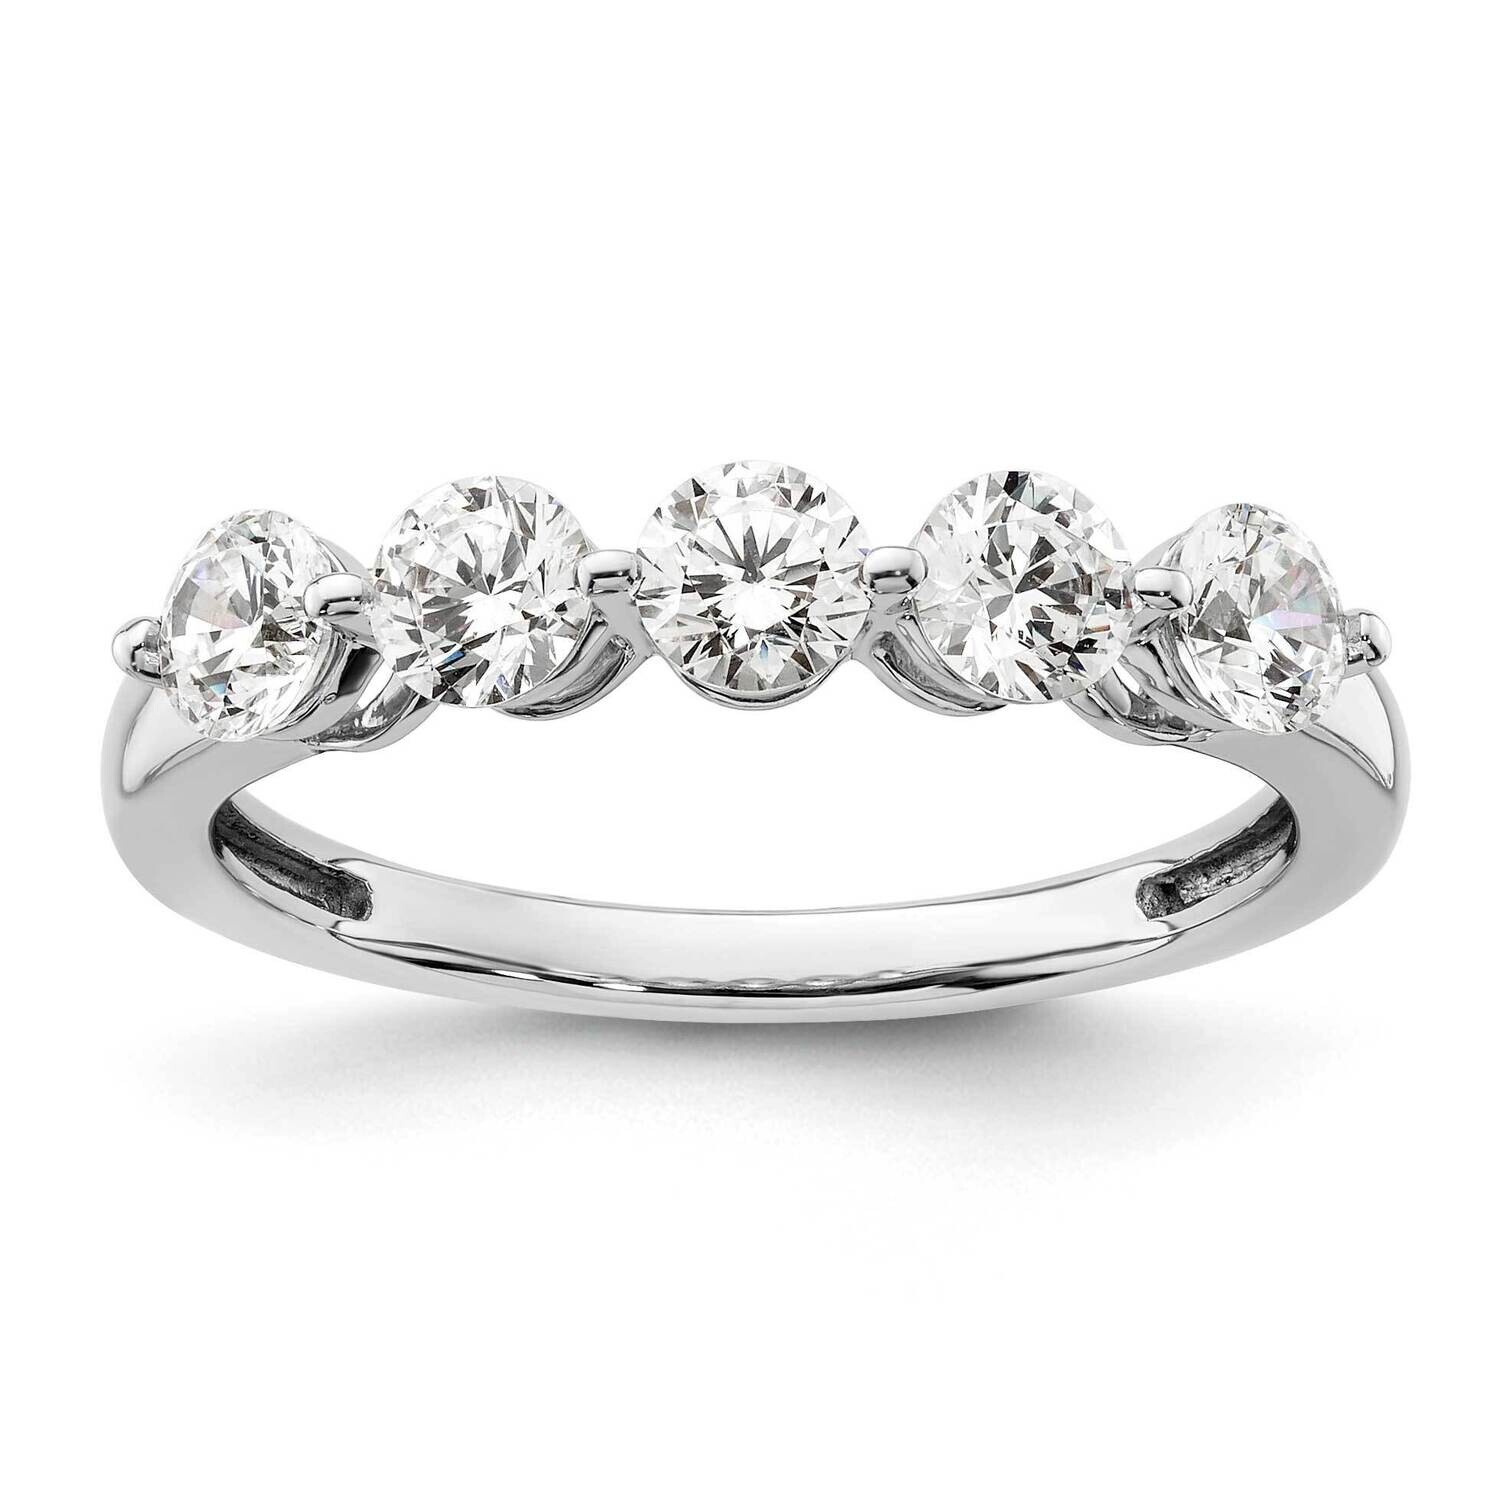 5-Stone Shared Prong Holds 5-3.8mm Round Diamond Band Ring Mounting 14k White Gold RM3182B-110-WAA